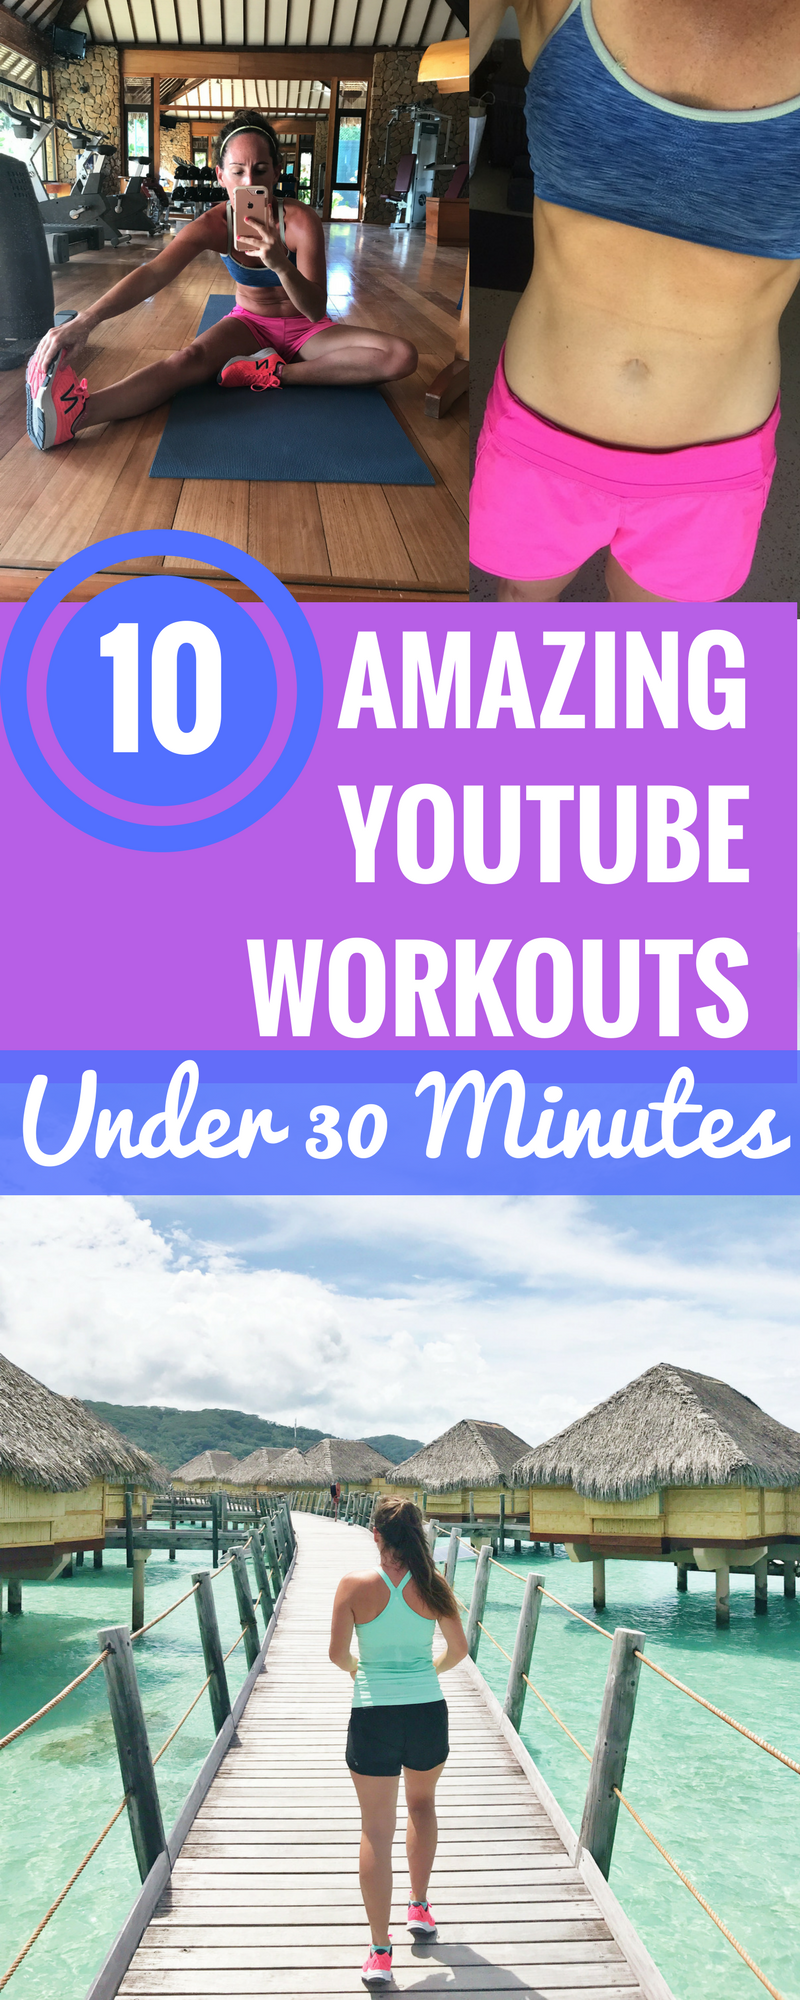 10 Amazing Youtube Workouts Under 30 Minutes - Easy Fitness Videos - Workout Tips - Fitness At Home - Quick HIIT Workouts - Youtube Fitness - Free Workouts At Home - Communikait by Kait Hanson